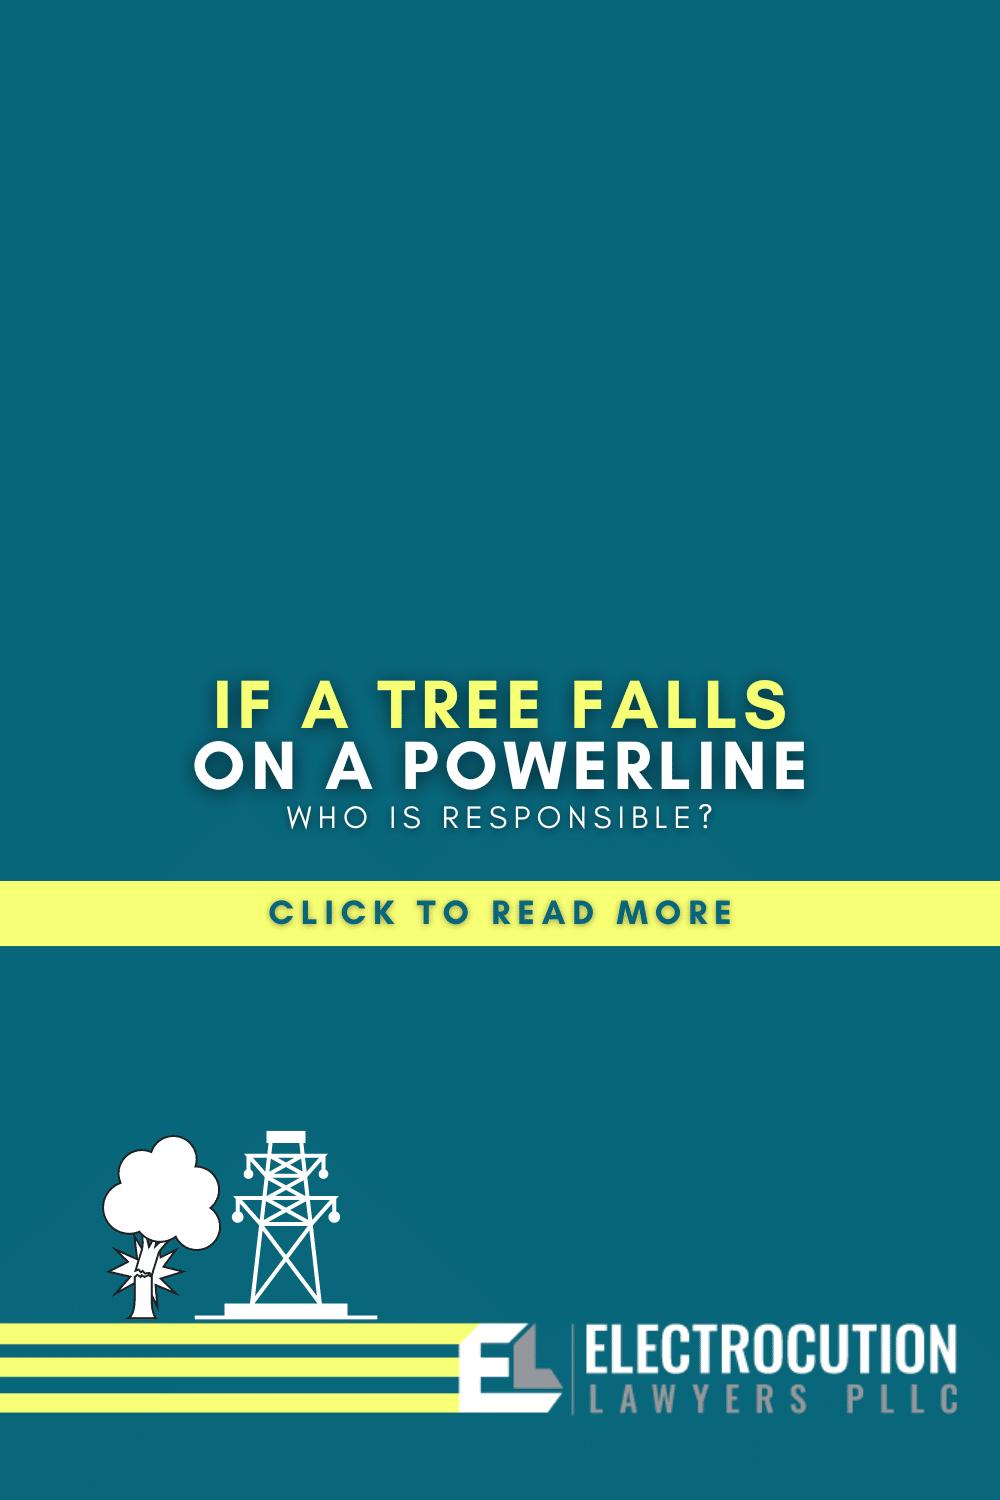 If A Tree Falls On Power Lines, Who Is Responsible?